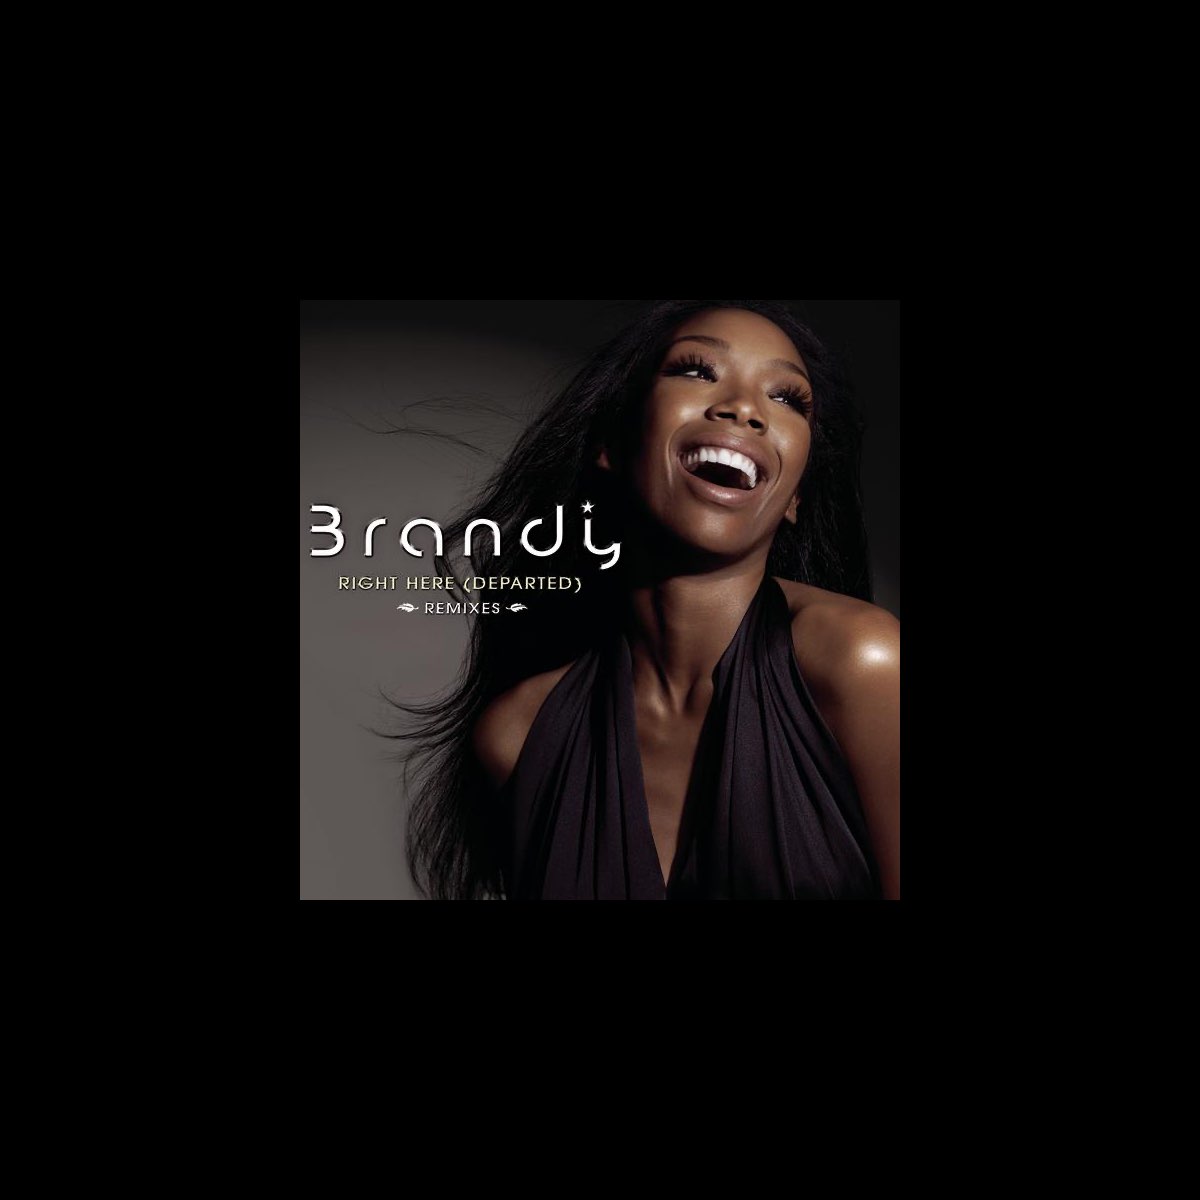 Right Here (Departed) [Remixes] by Brandy on Apple Music